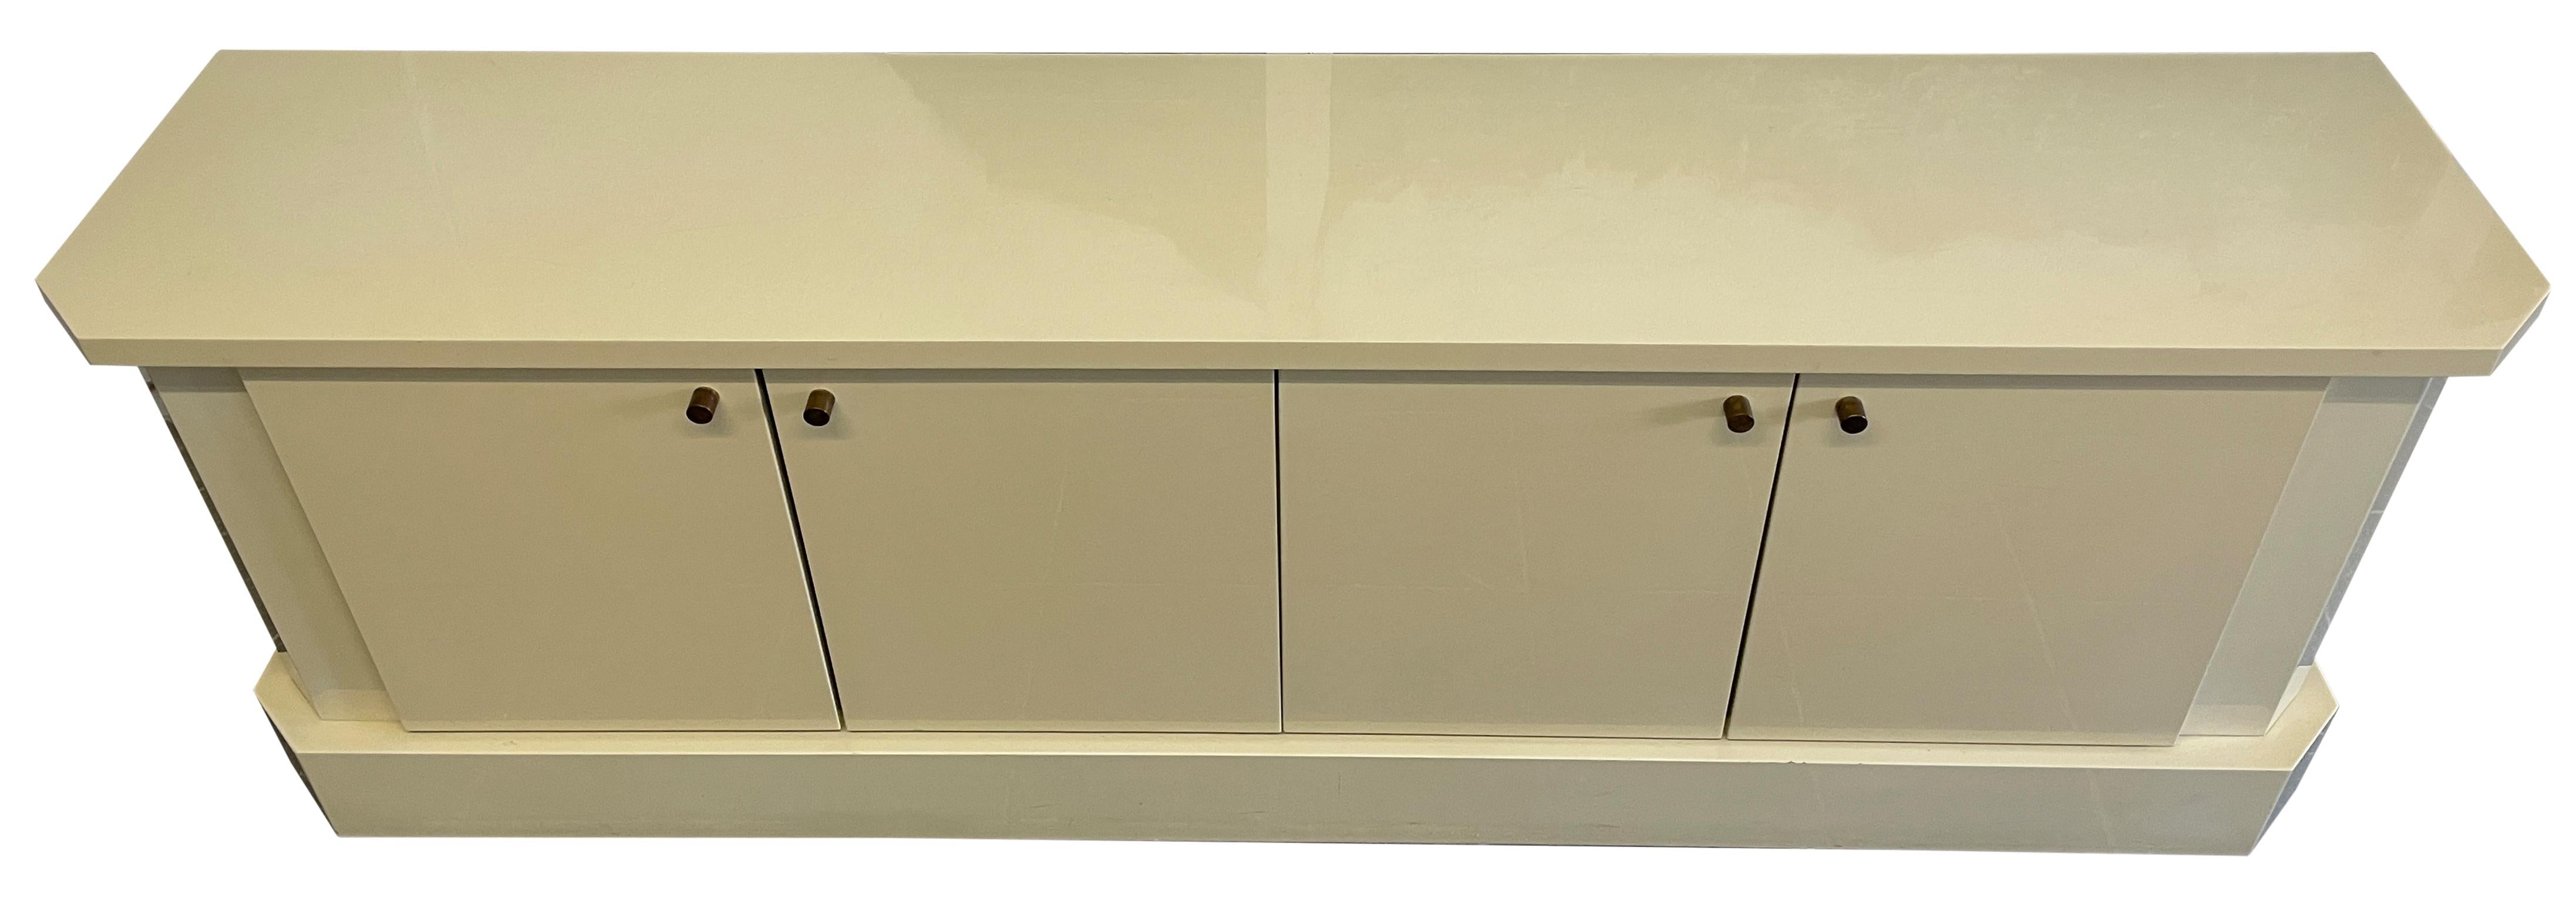 Stunning Jean Claude Mahey Credenza 4 Door Brass Pulls Ivory Lacquer France 2